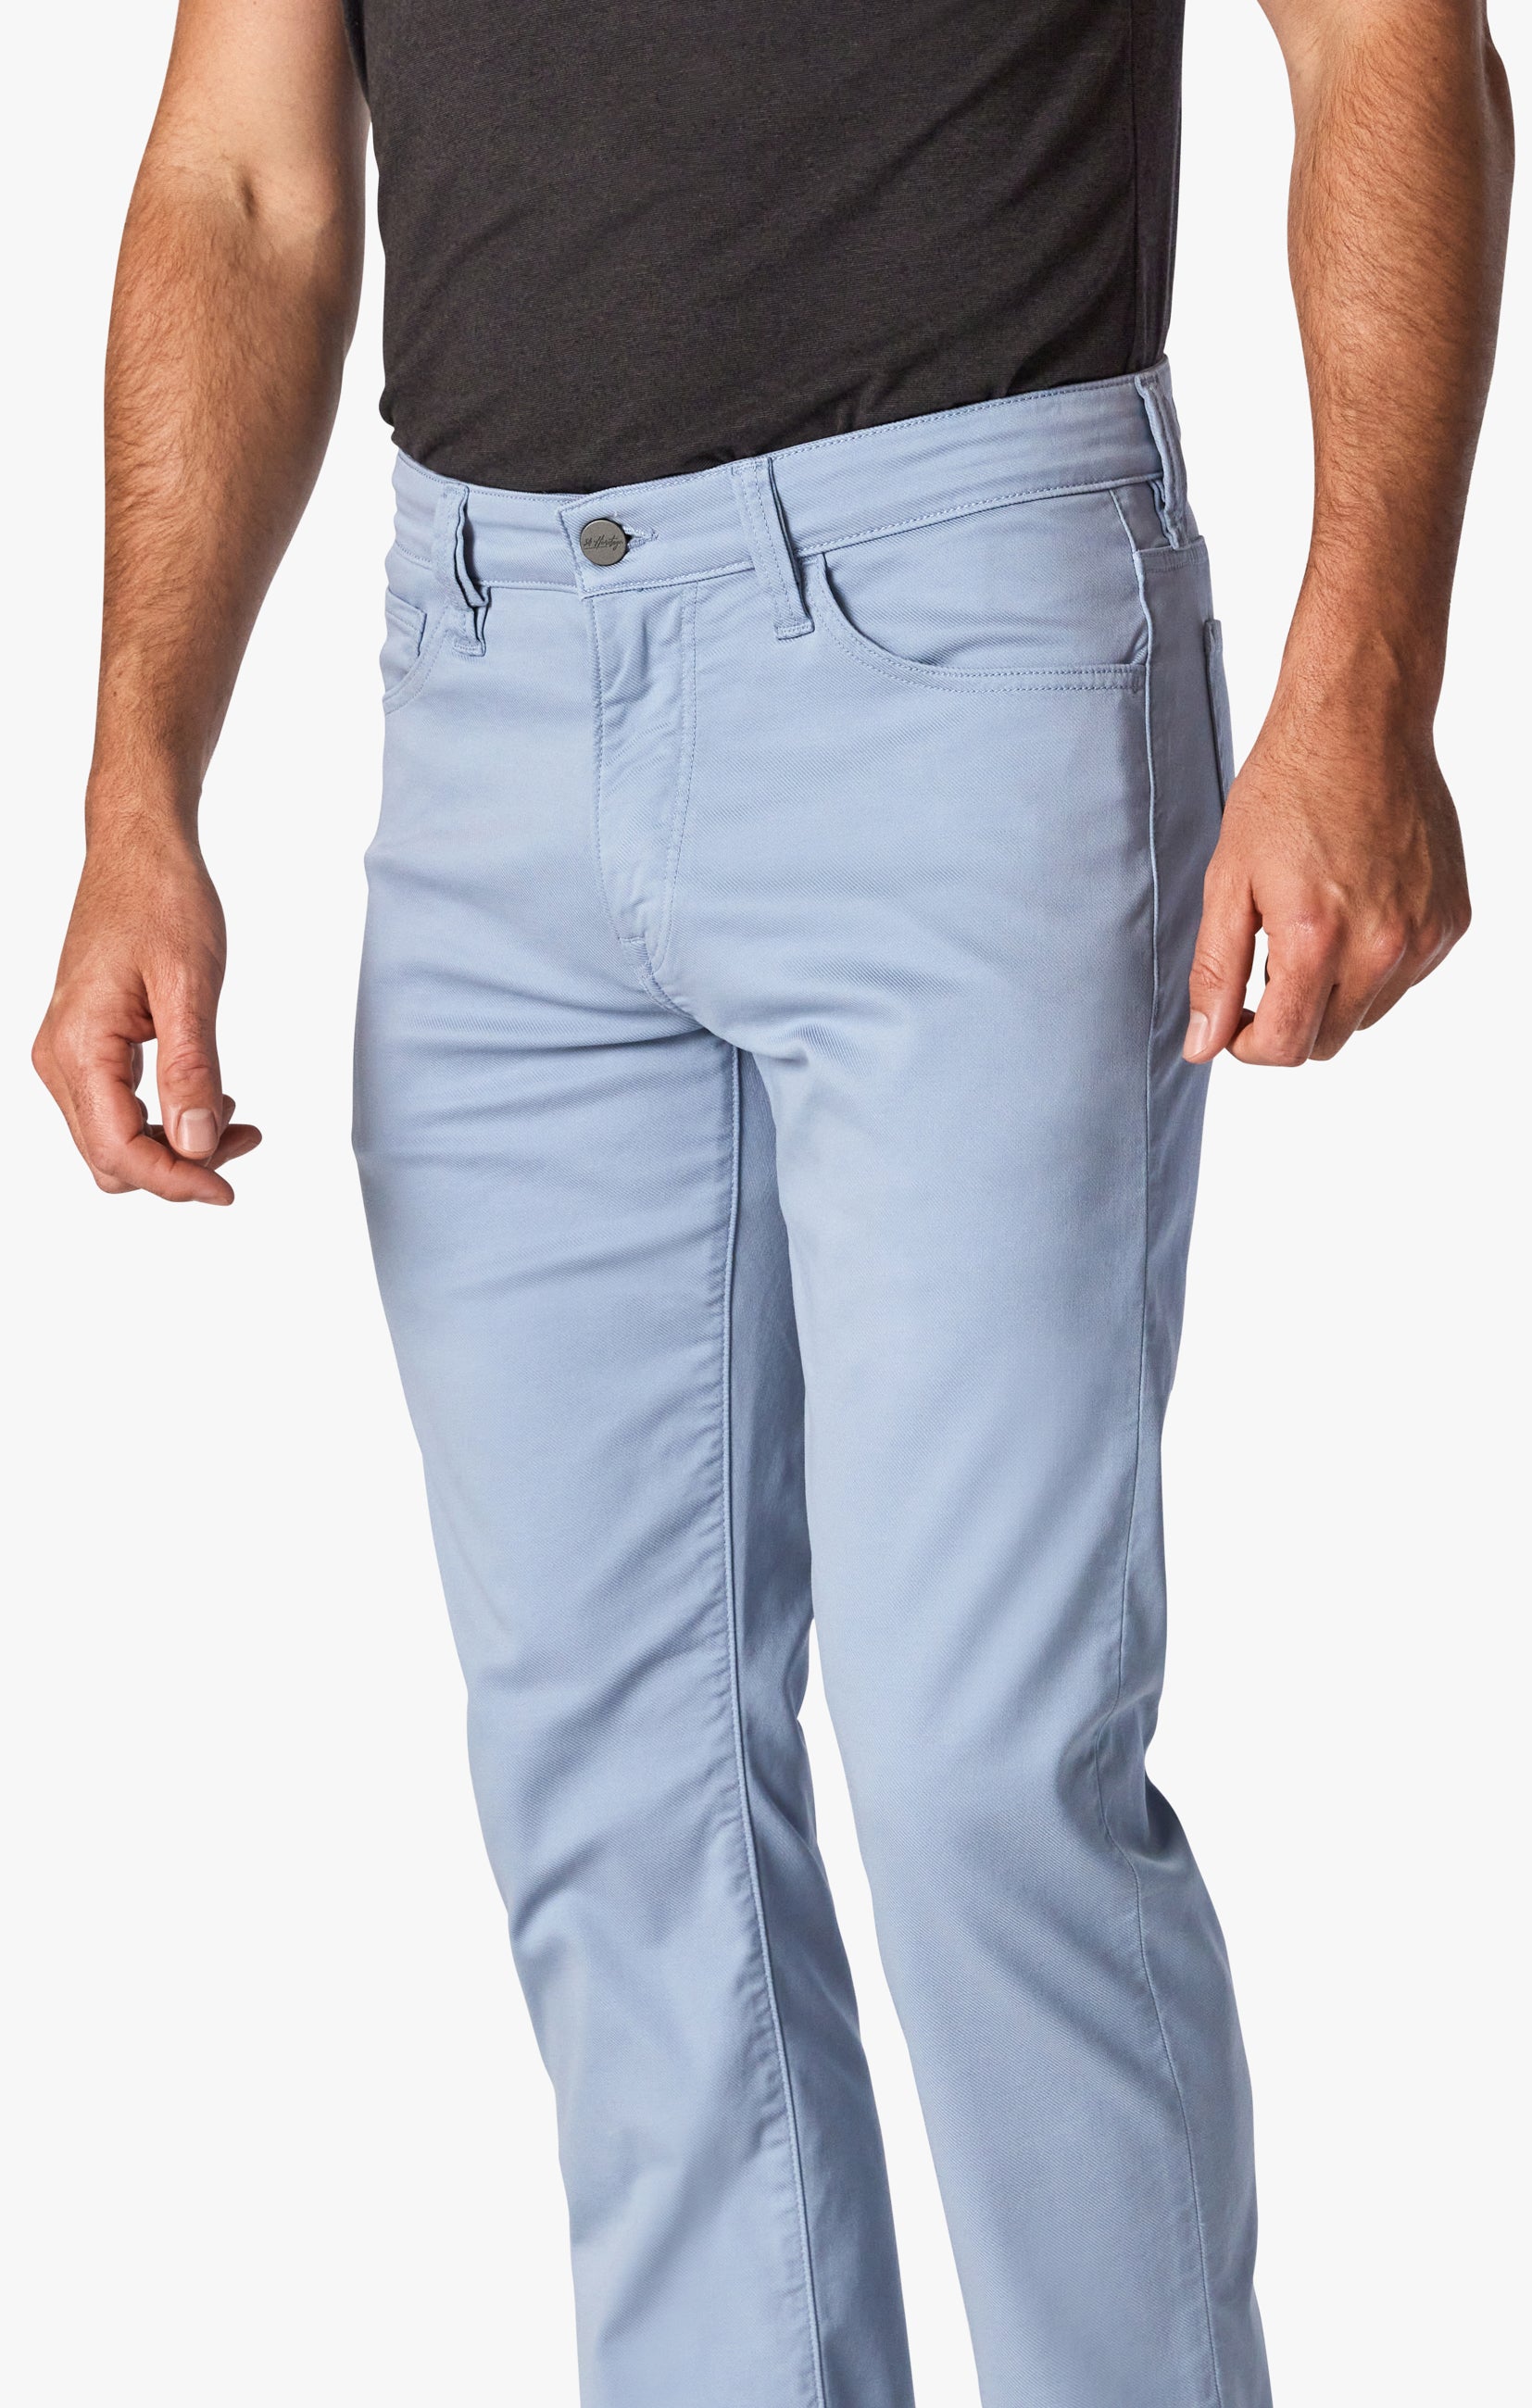 Courage Straight Leg Pants In French Blue Summer Coolmax Image 2